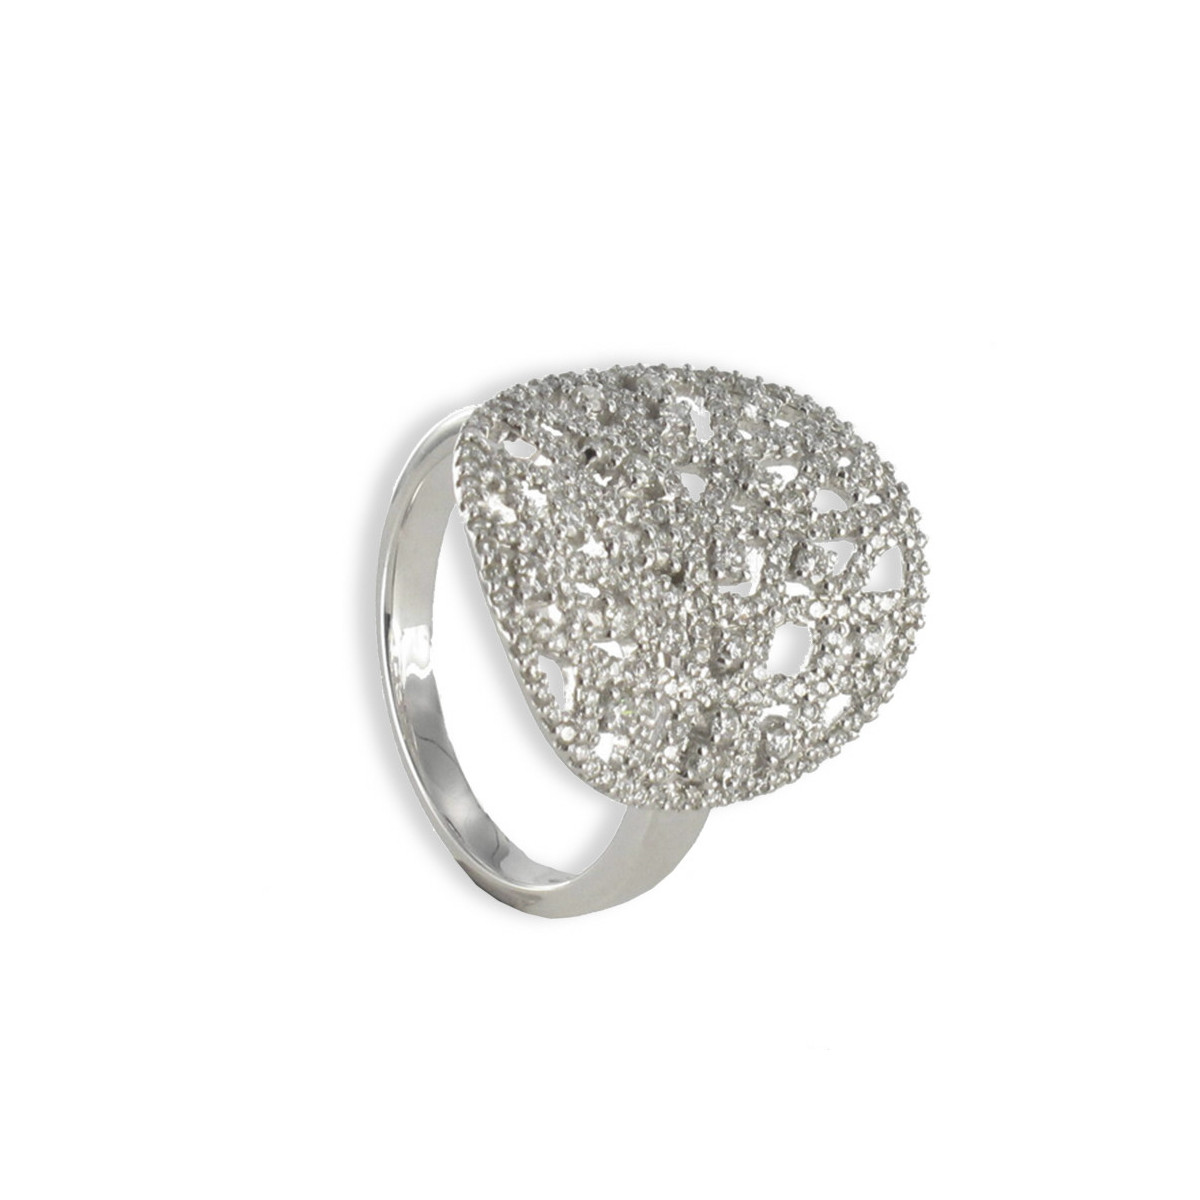 WHITE GOLD RING WITH 208 DIAMONDS